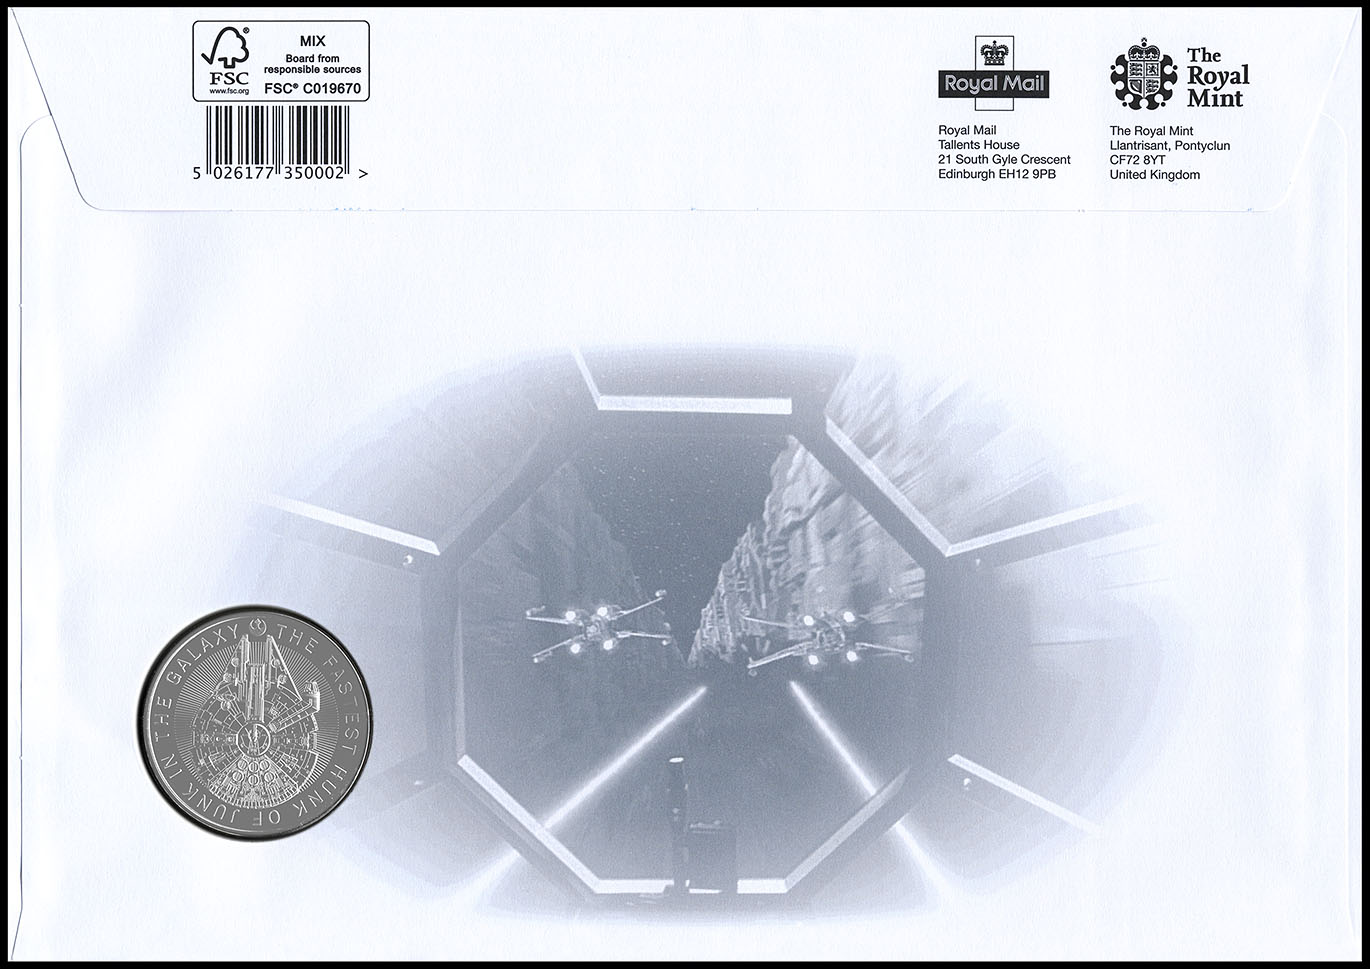 http://www.fandom.ru/about_fan/stamps/cover_greatbritain_2015_starwars_fdc_medal_1_can_chesterfield_2015_10_20_o.jpg